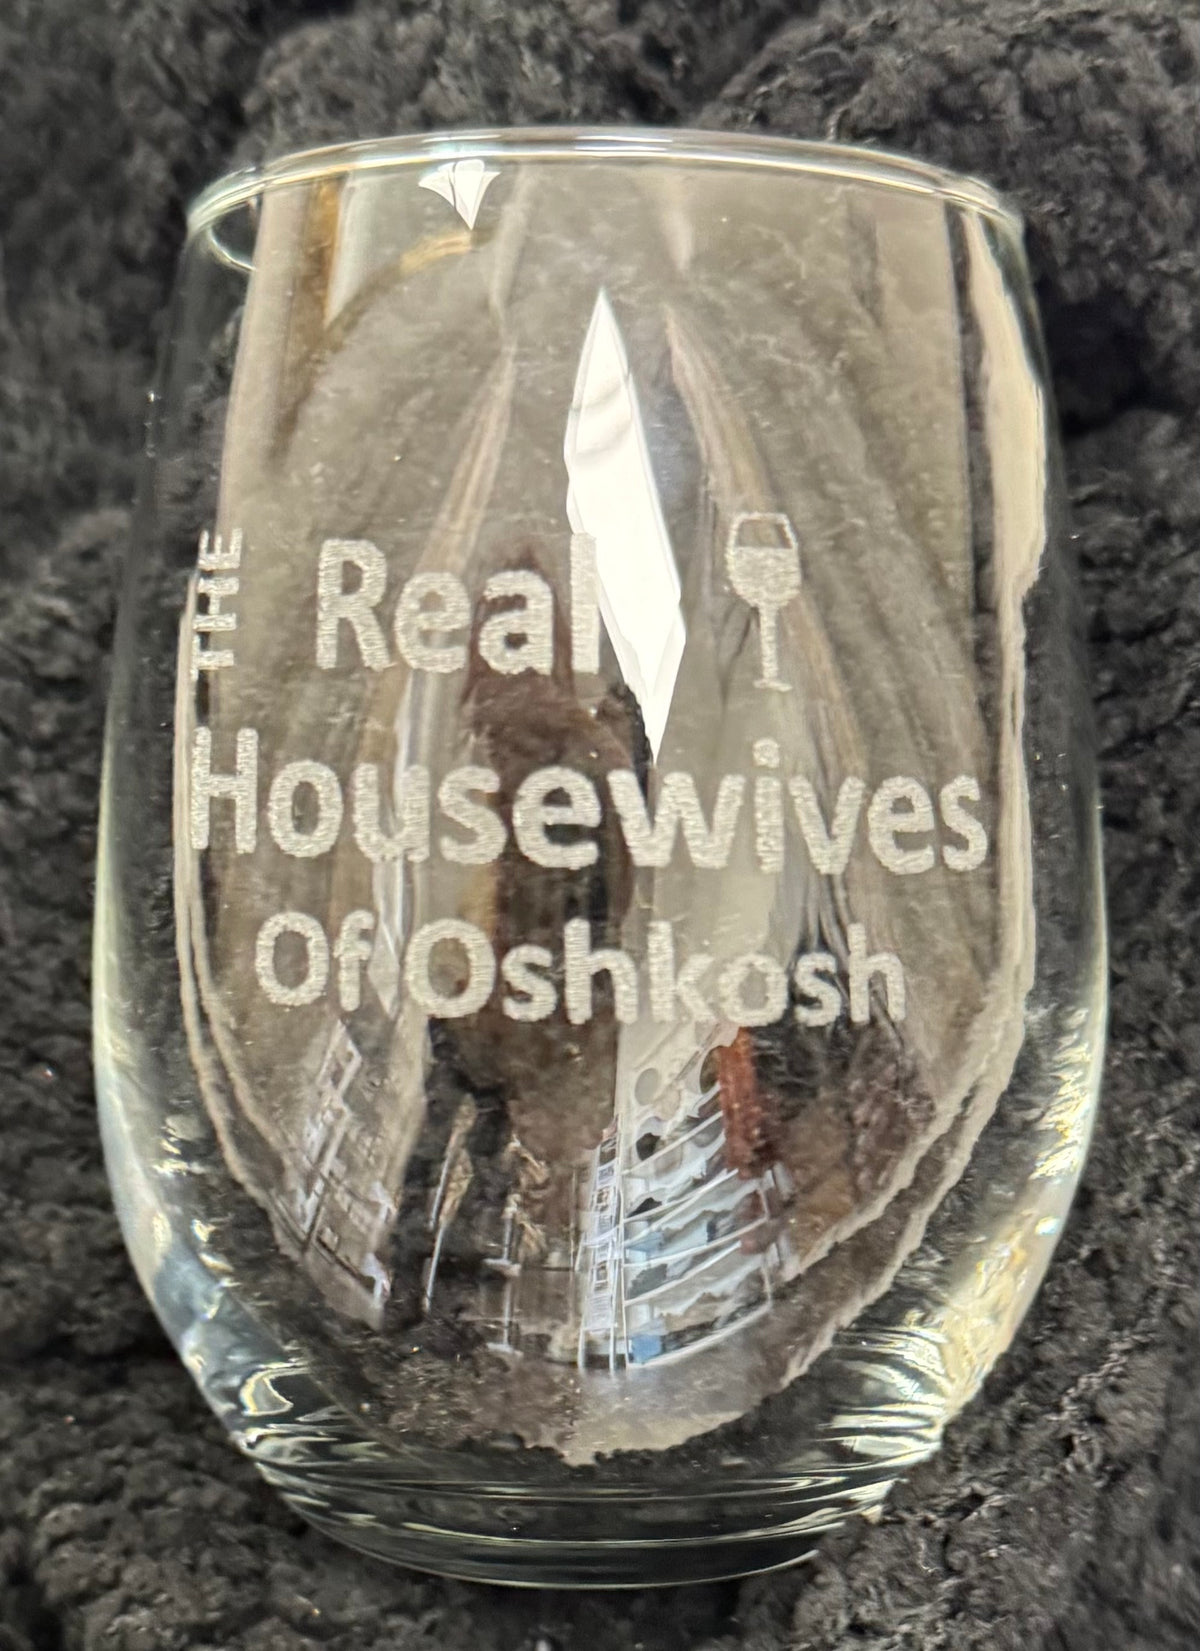 Real Housewives Custom "Oshkosh" Etched Stemless Wine Glass